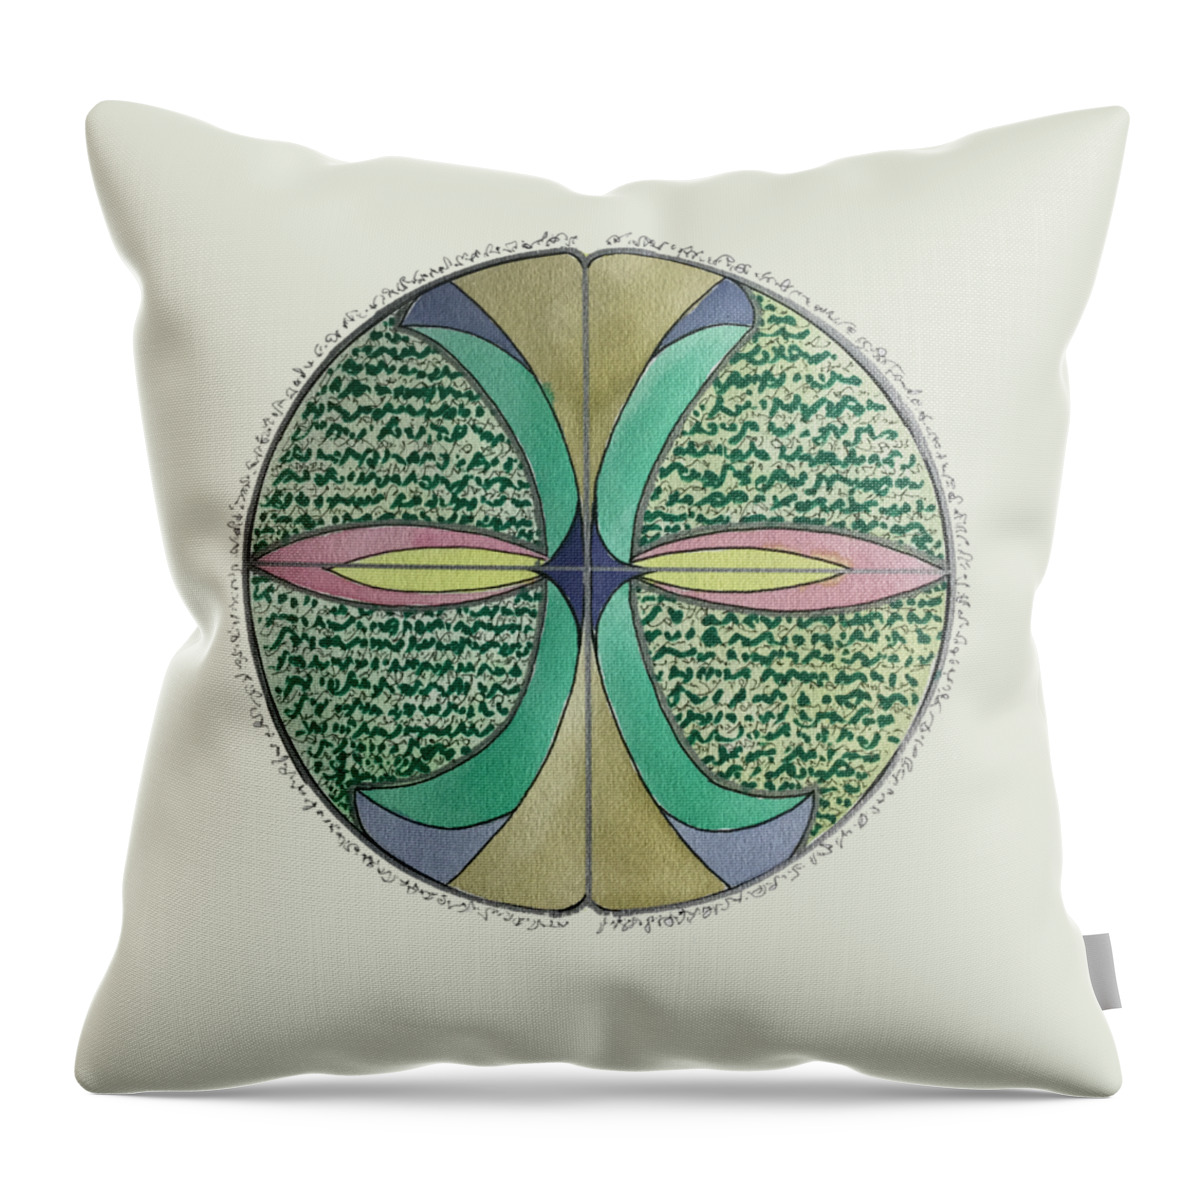 Soul Portrait Throw Pillow featuring the painting MarGret Soul Portrait by AHONU Aingeal Rose